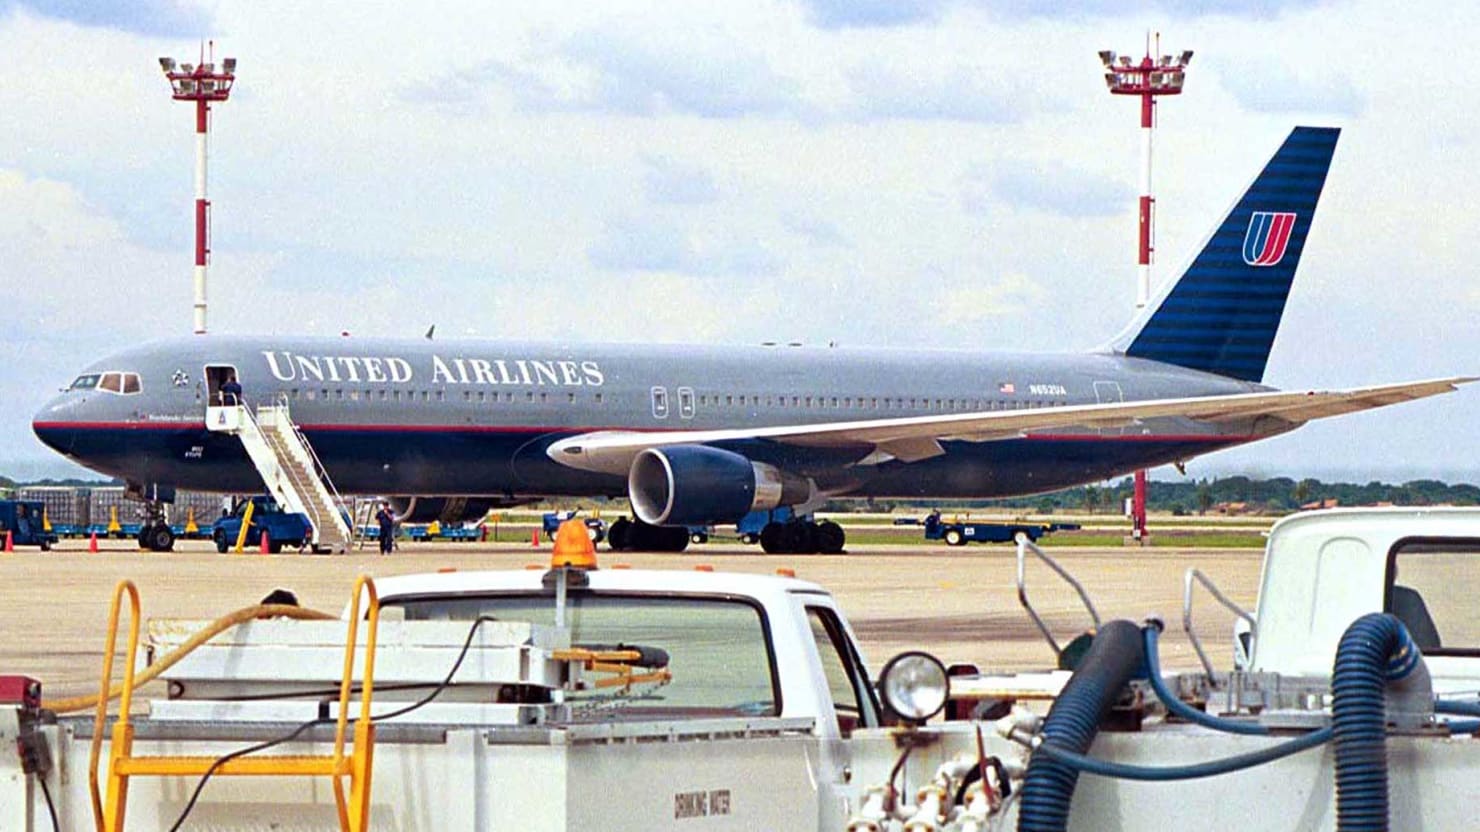 TMZ Claims It Found a 'Suspicious' Fifth 9/11 Plane That Never Was